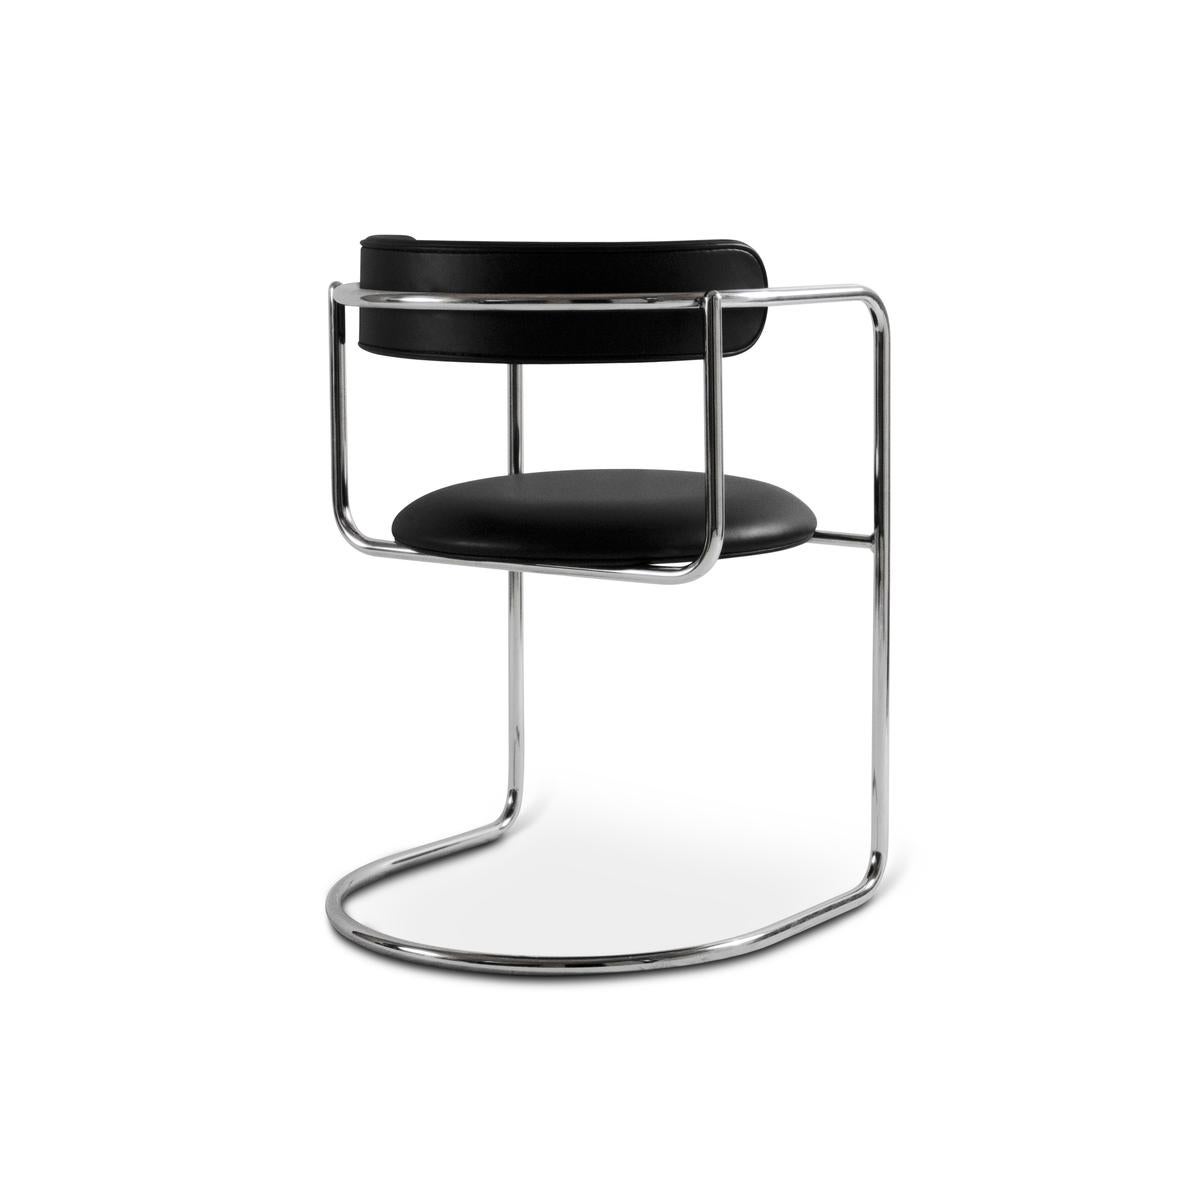 FF Cantilever, chair 
Design: Friends & Founders

Upholstery available in a wide range of fabrics and leathers
Model shown (fabric): Nevotex, Dakar 0842

Legs: 
4 legs or cantilever
Black steel or chrome

Back:
Round or Cubic


Price may vary